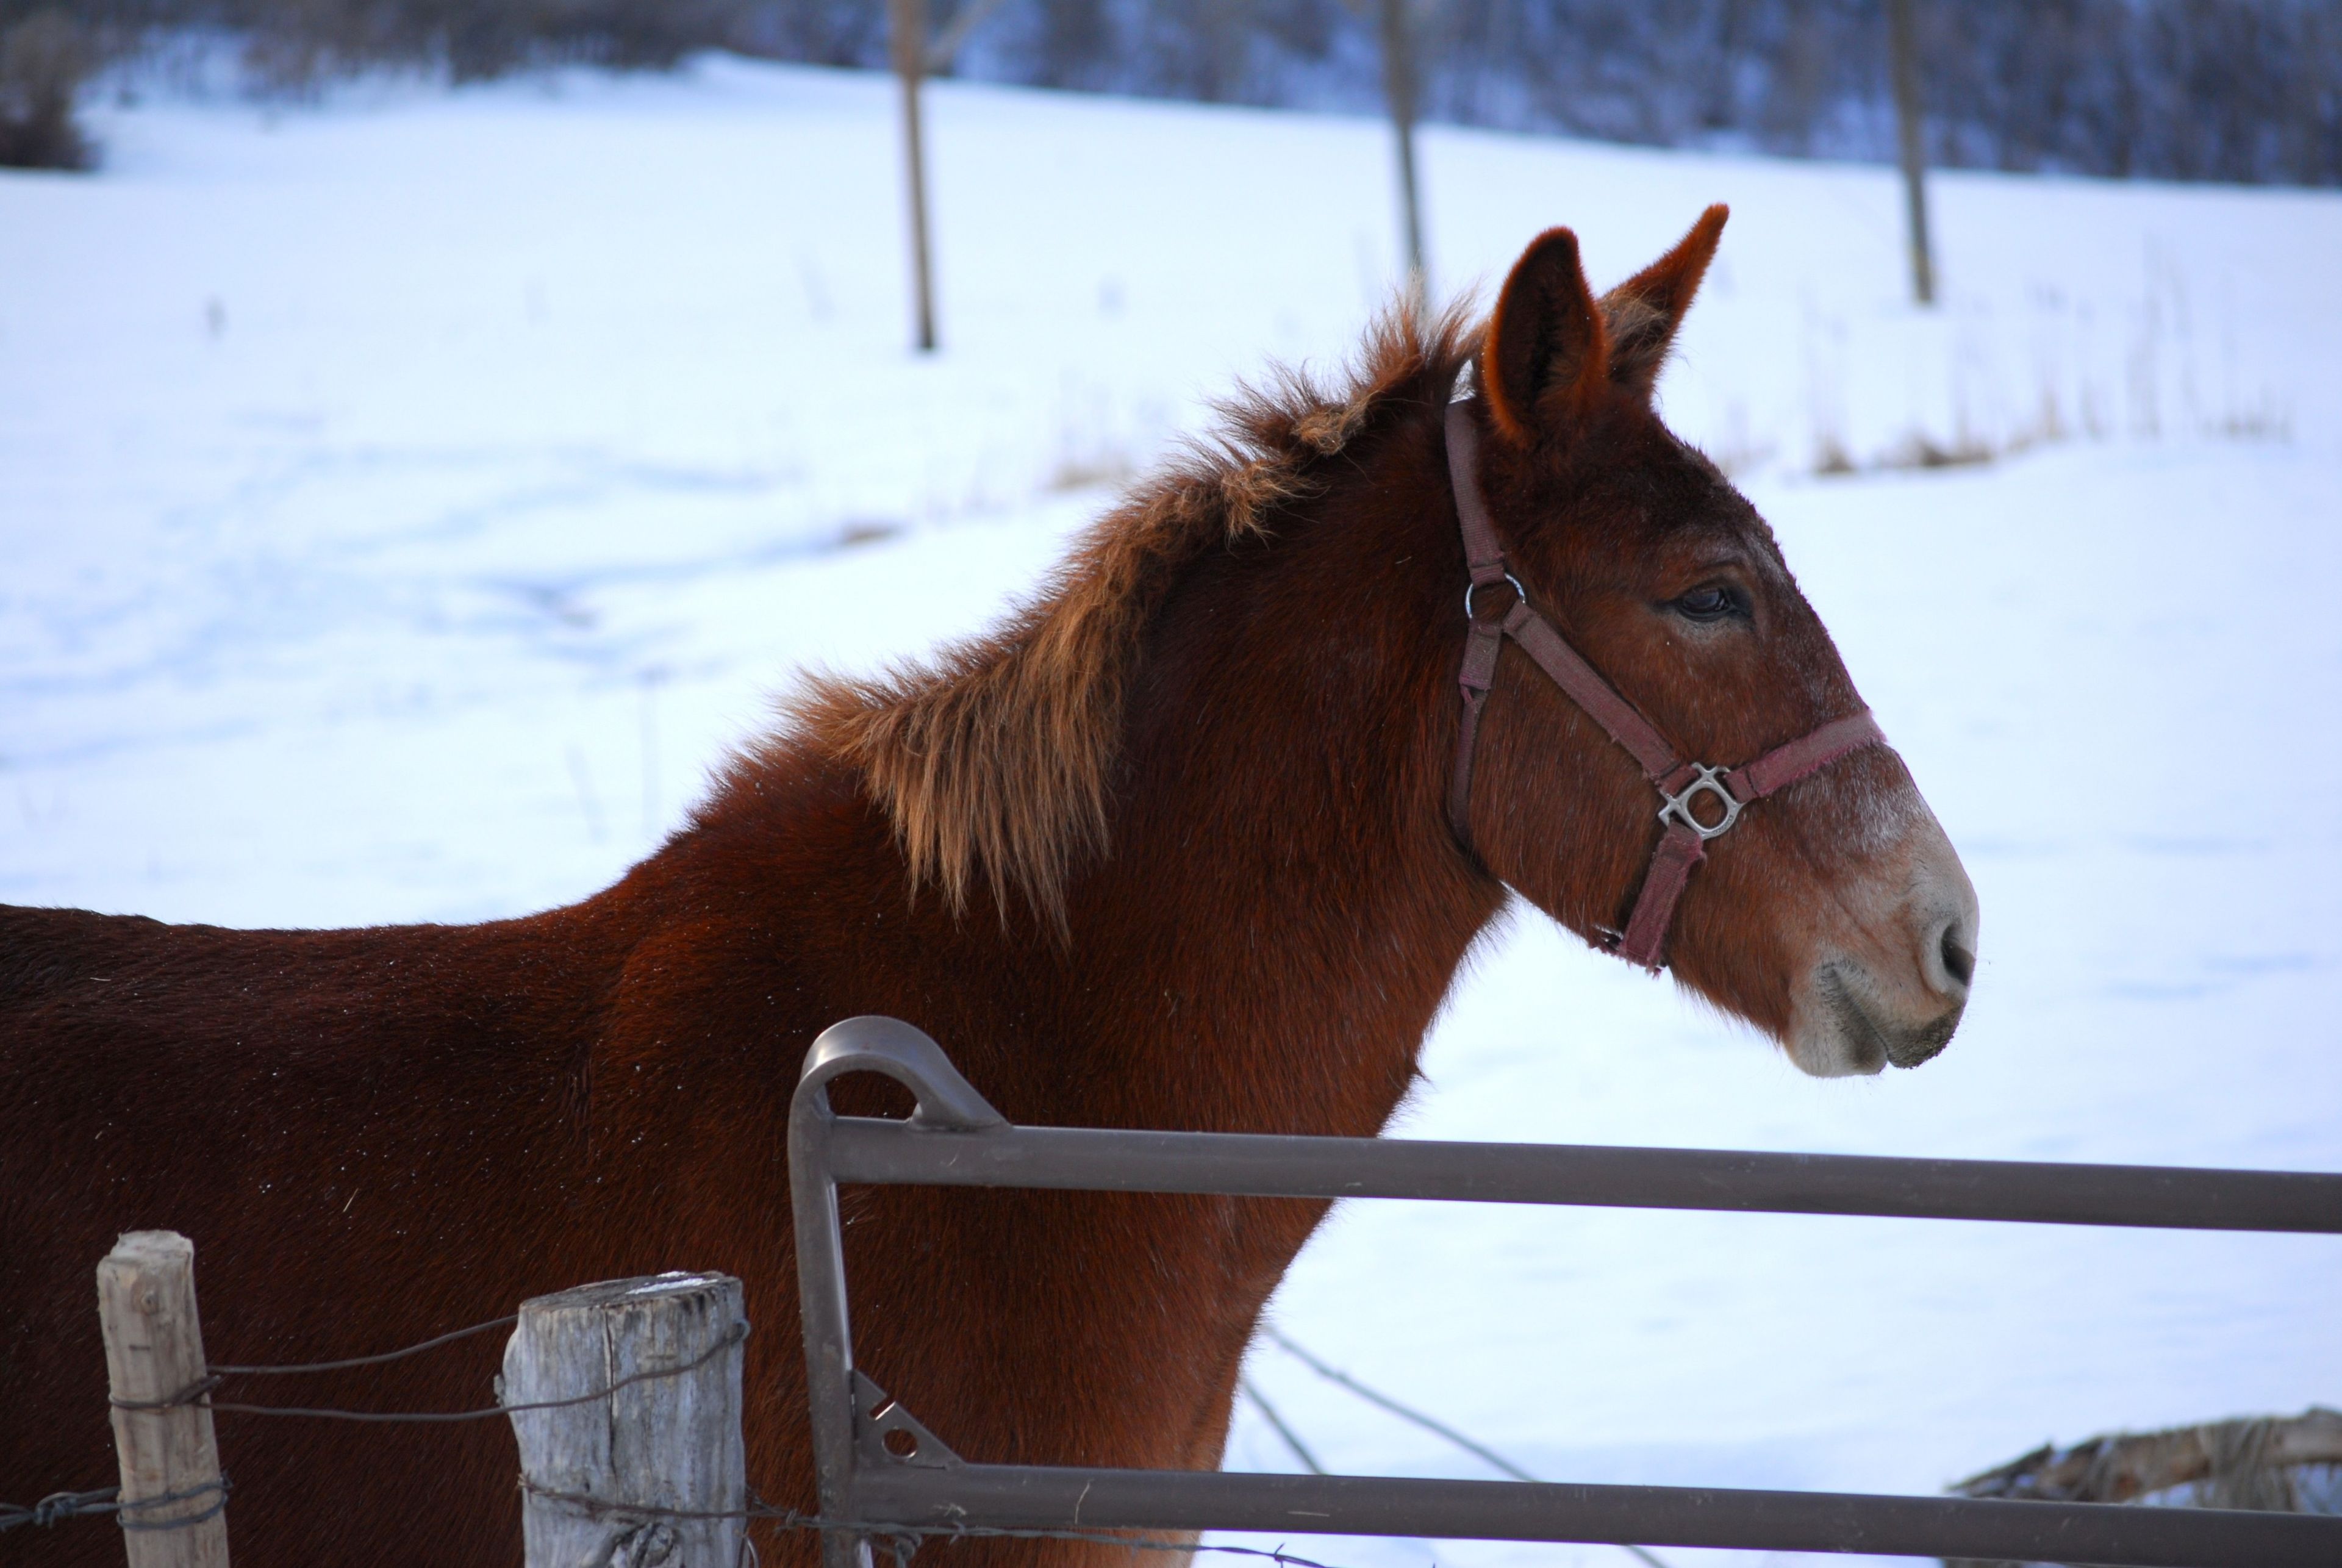 A brown mule stands behind a fence outside in winter.